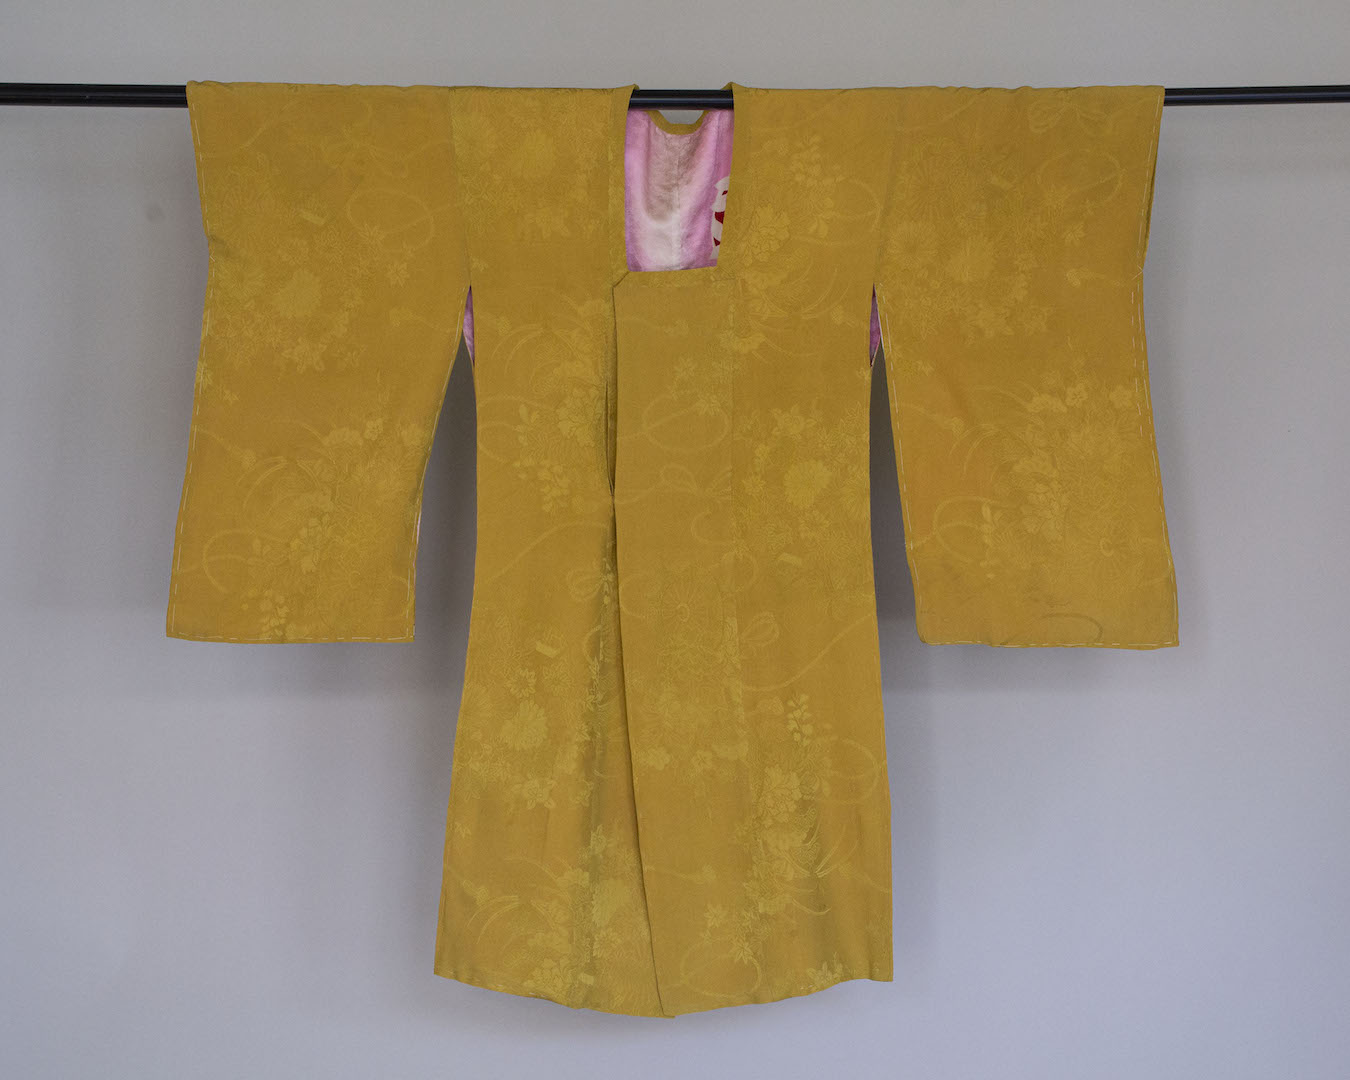 Woman's michiyuki (knee-length outdoor coat), with a damask floral pattern. Japan, 20th century.